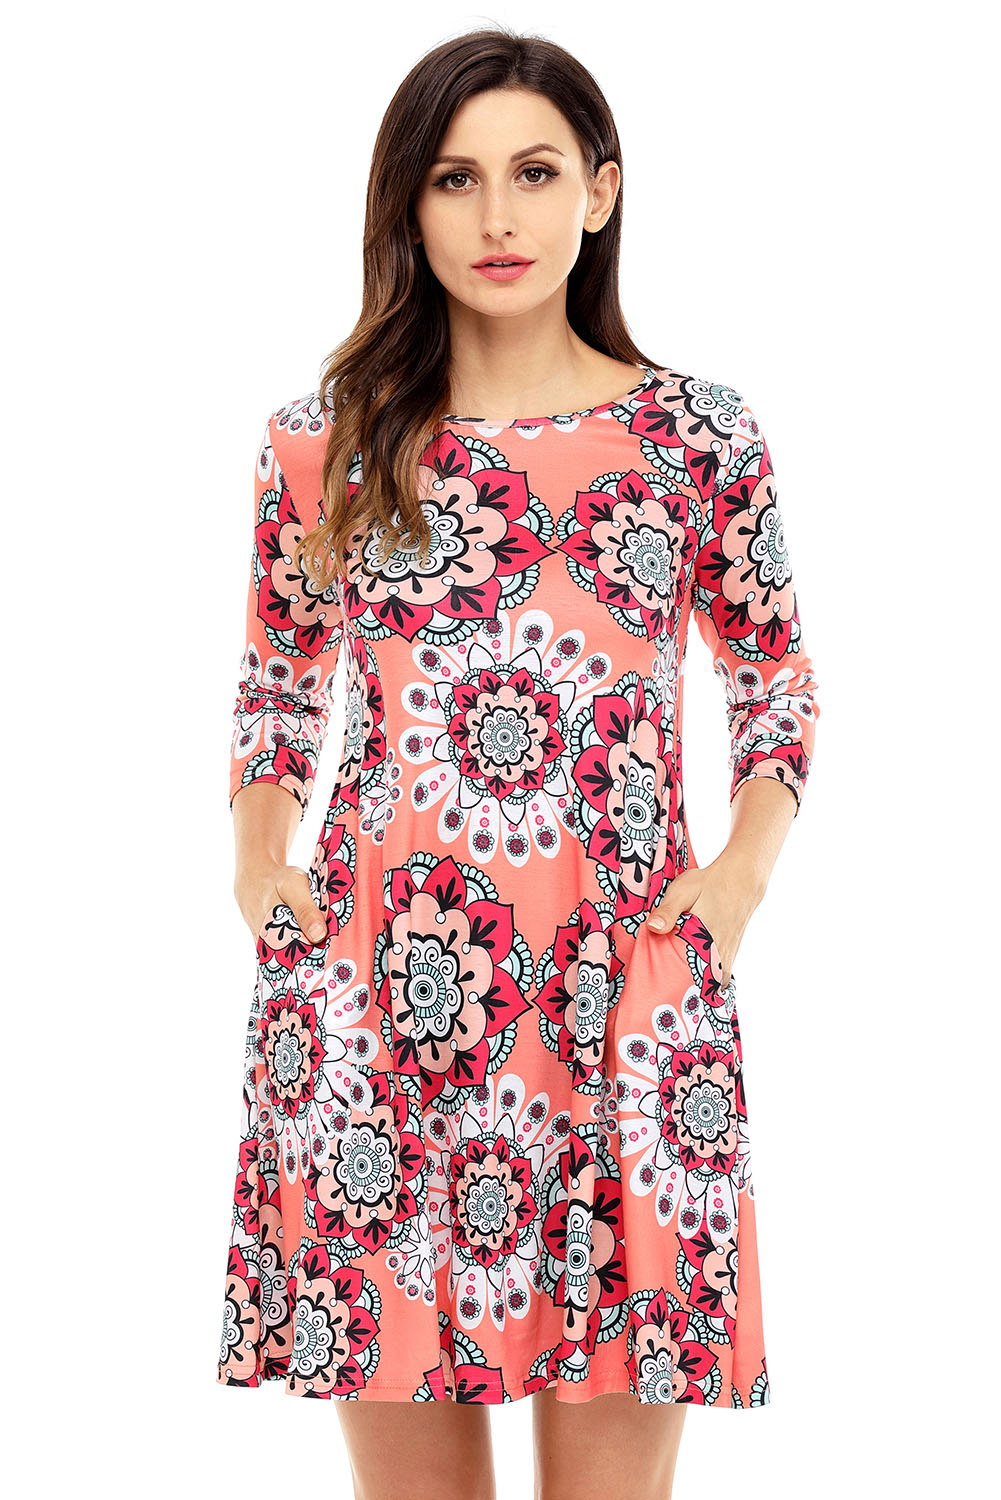 BY220051-14 Bohemian Sunflower Print Coral Dress